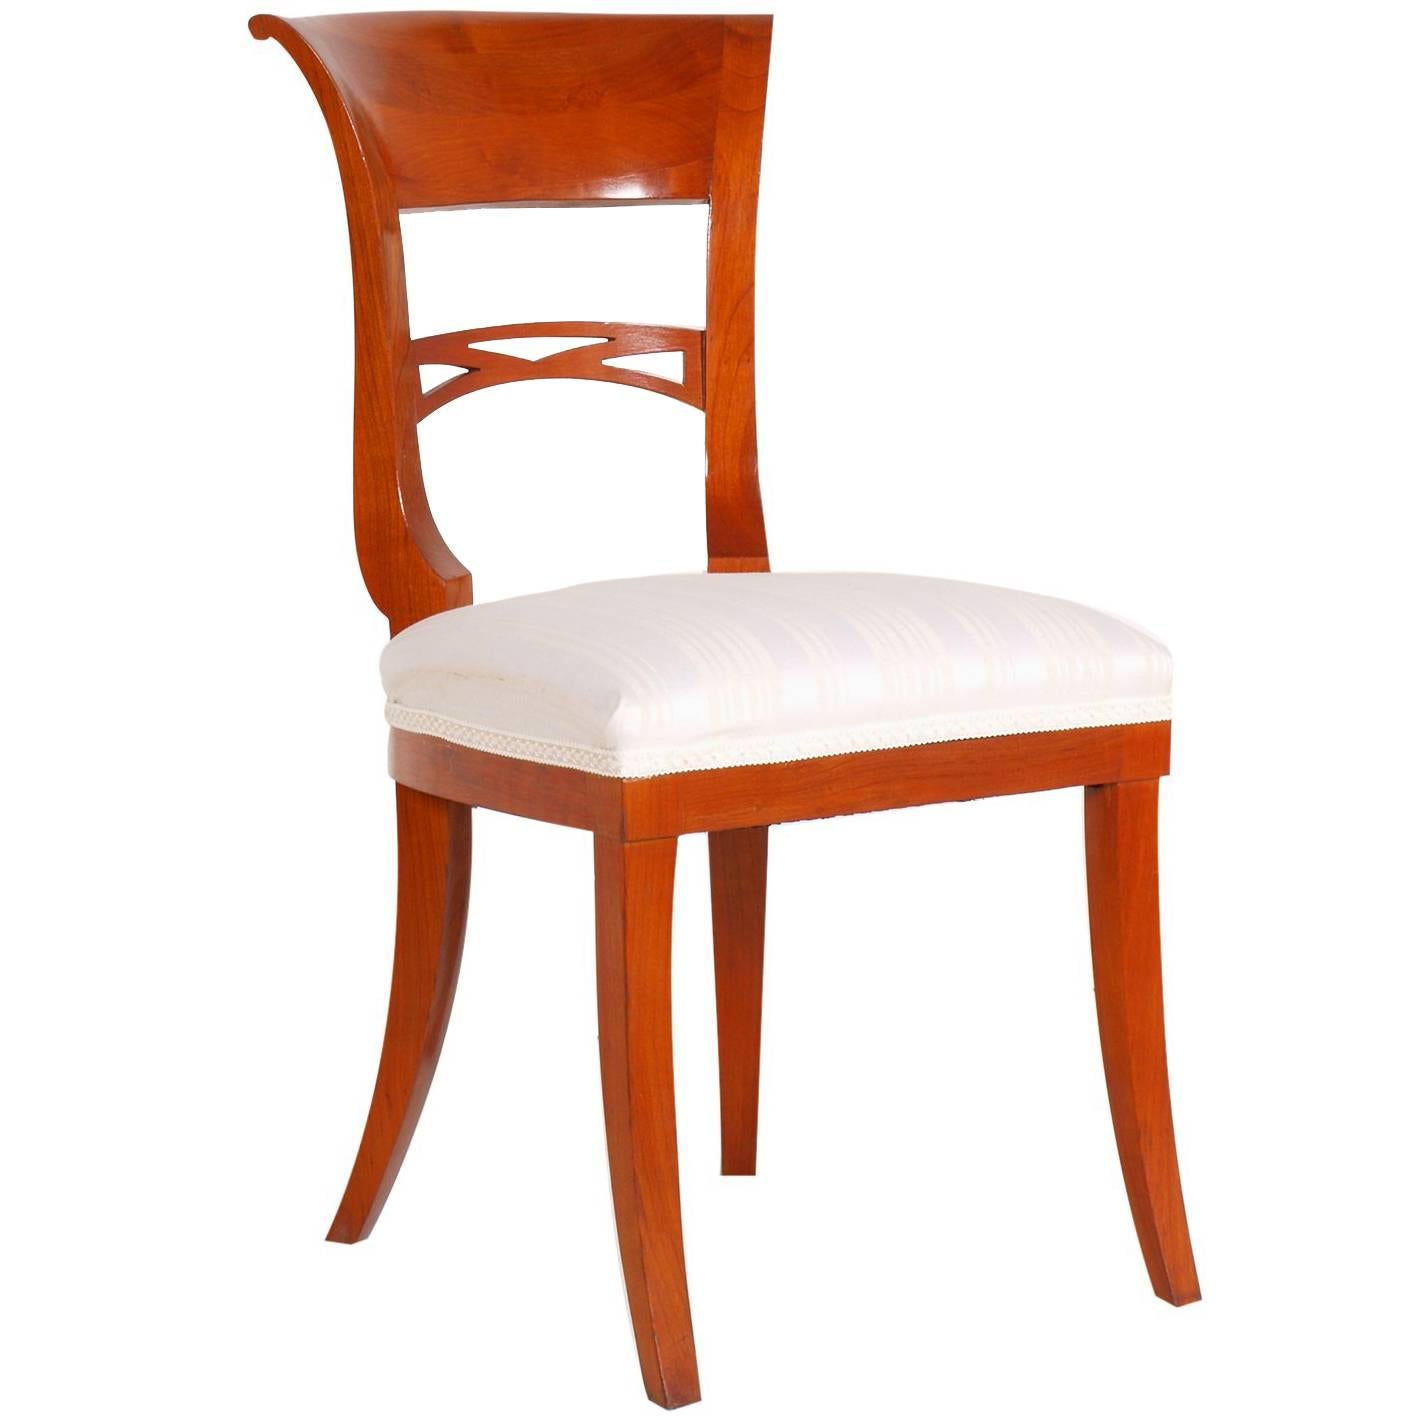 Early 20th Century Biedermeier Chair in Cherrywood Restored and Polished to Wax For Sale